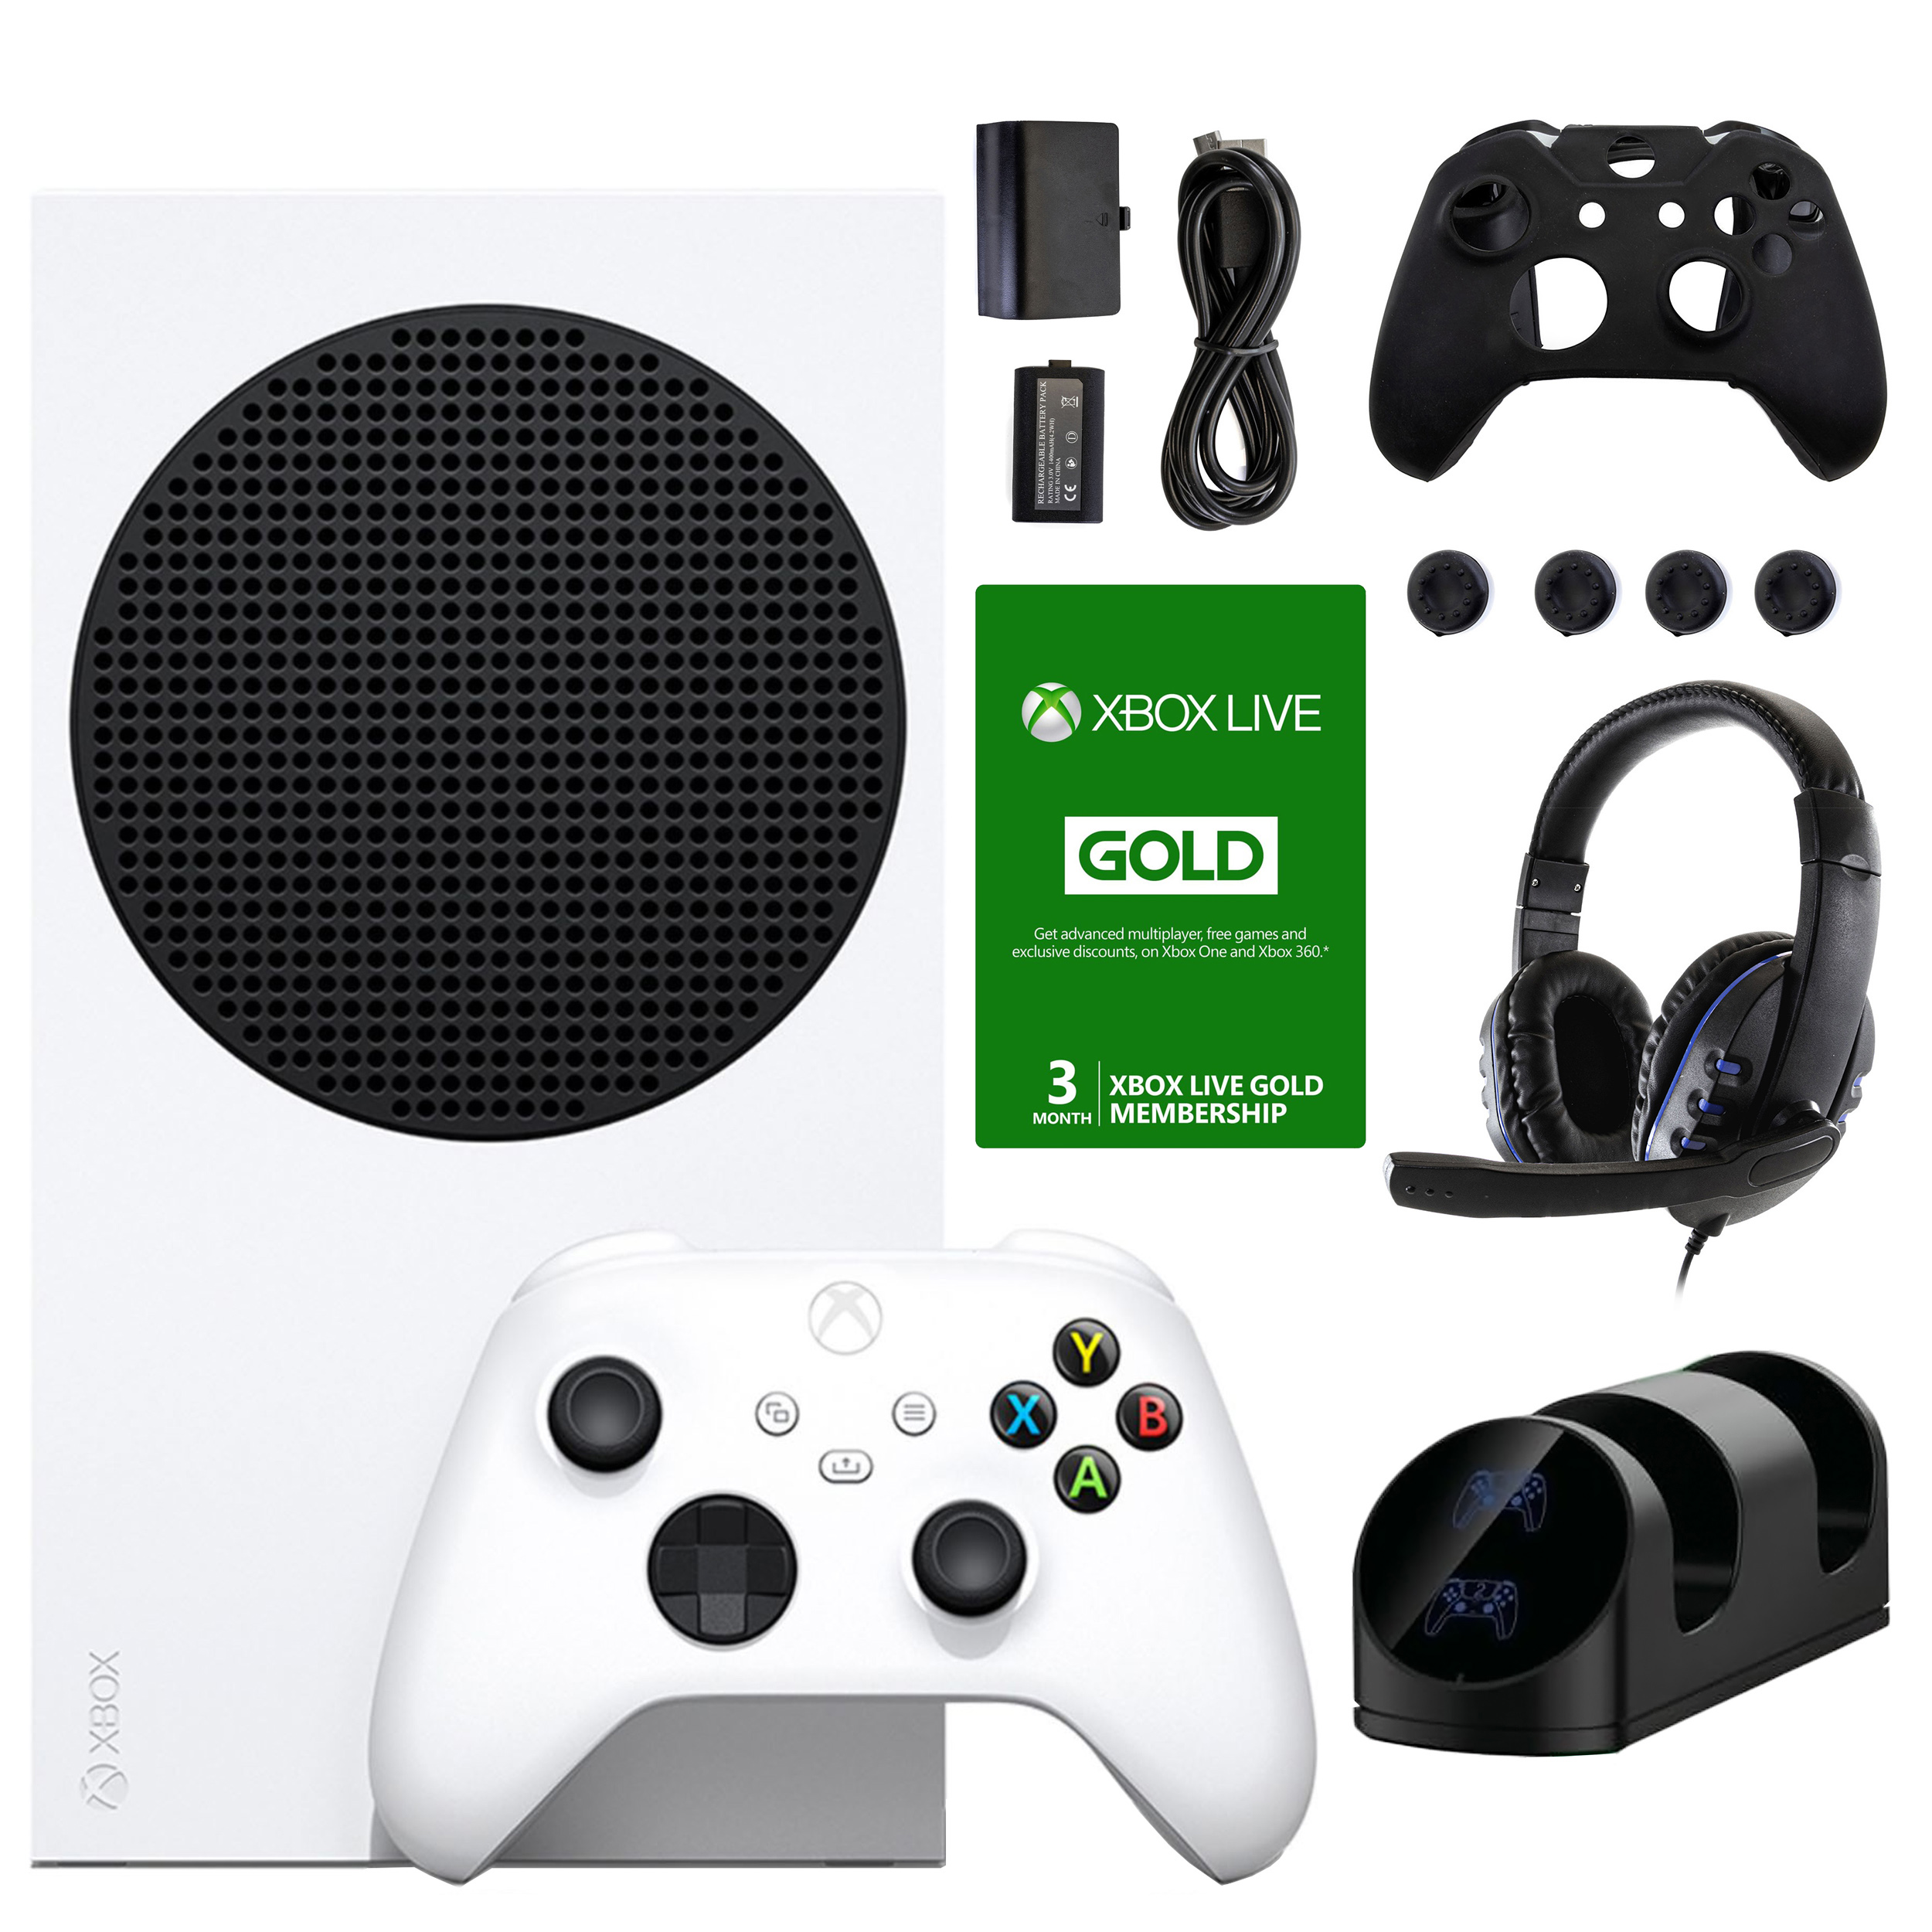 Microsoft Xbox Series S 512 GB All-Digital Console with Accessories Kit and 3 Month Live Membership Voucher